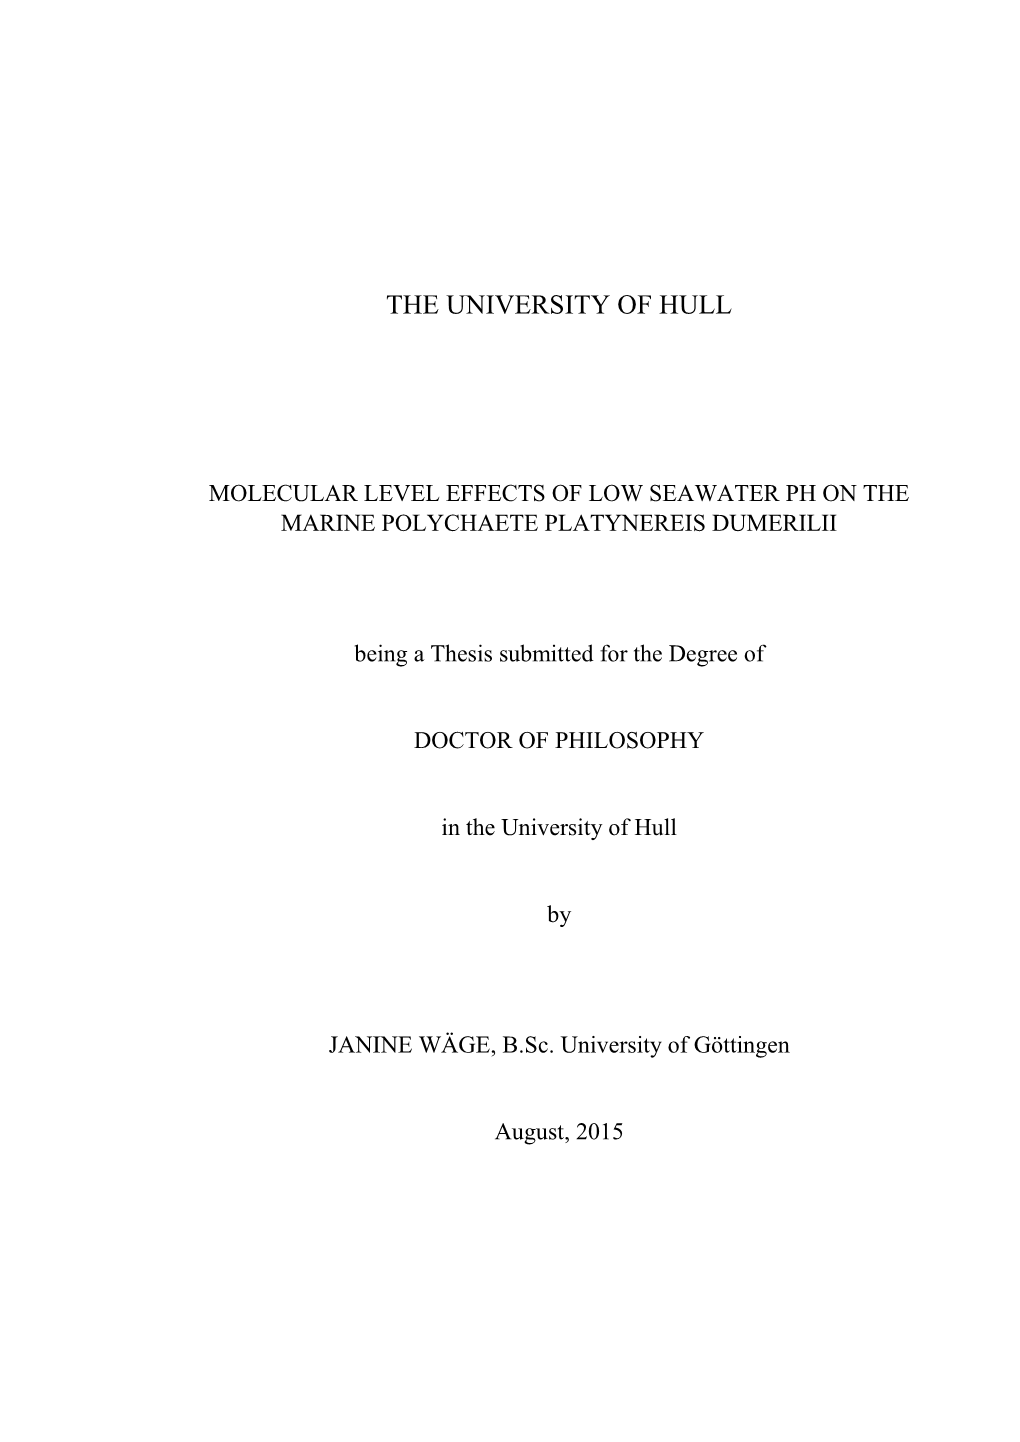 Thesis Submitted for the Degree Of